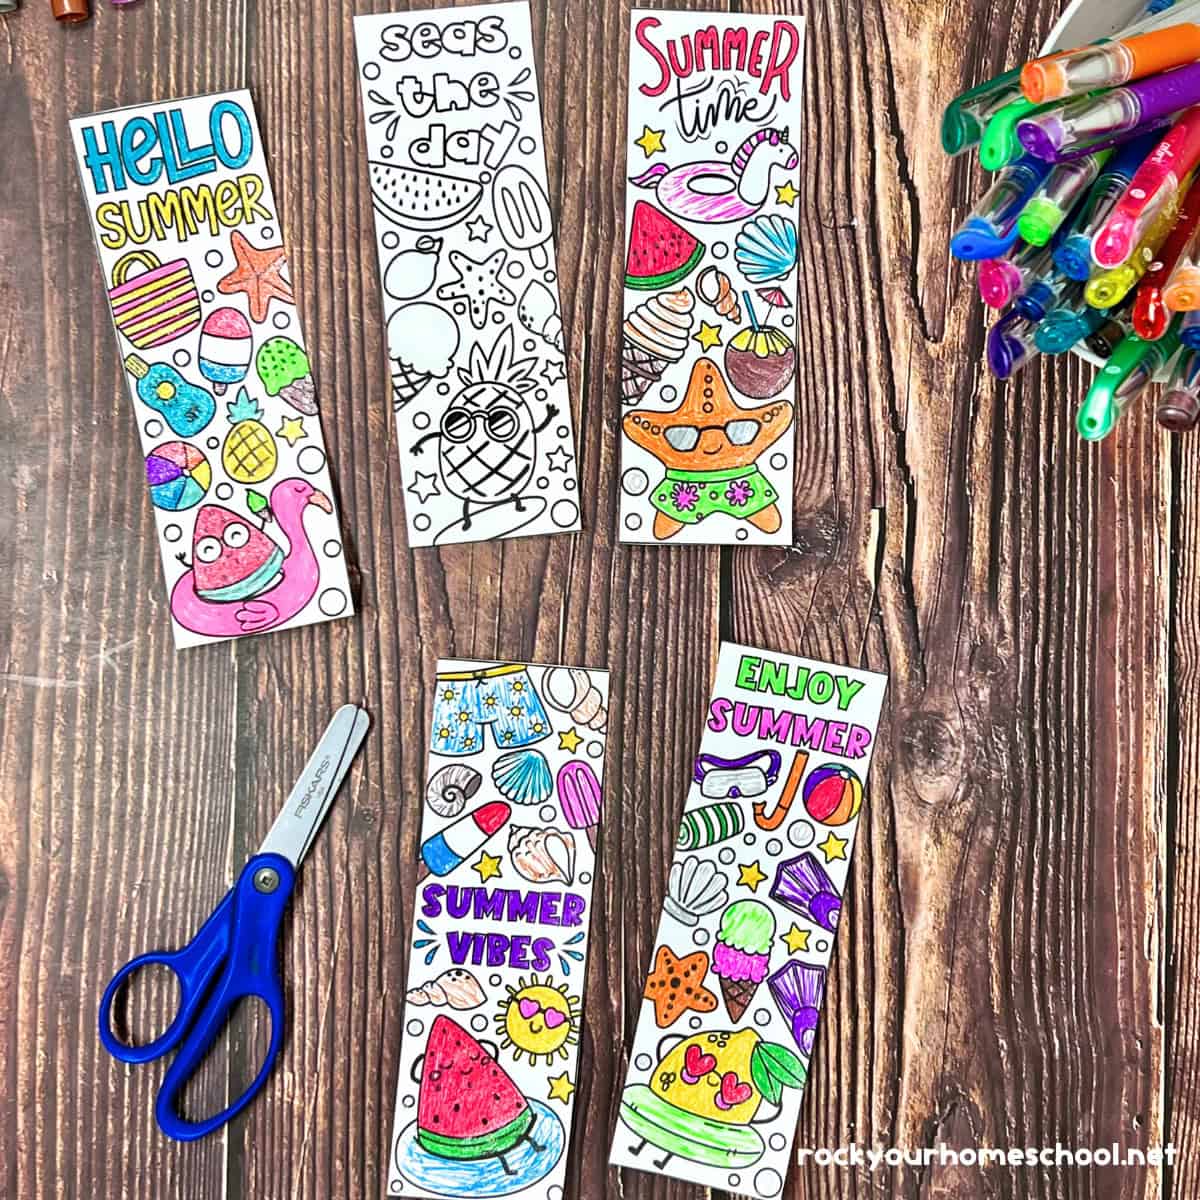 Summer Bookmarks To Color For Super Reading Fun (Free Set)